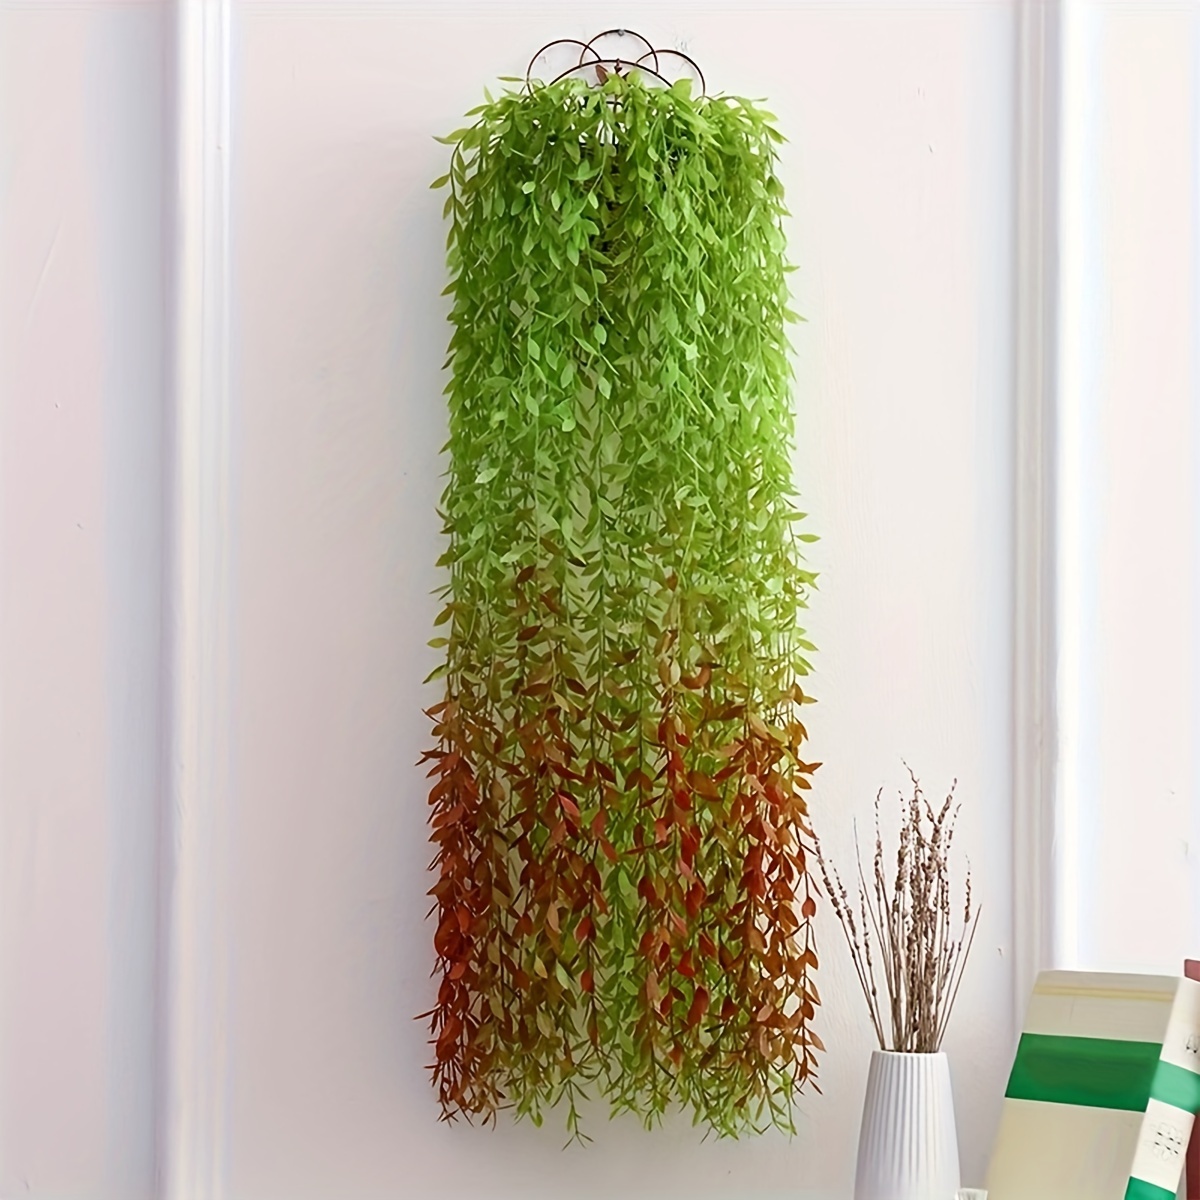 

5pcs Artificial Hanging Plants, Fake Vines Plastic Ivy Greenery Christmas Decorations Garland Faux Vine Grass Flowers Leaves Outdoor Indoor Home Garden Party Wedding Bedroom Wall Decor